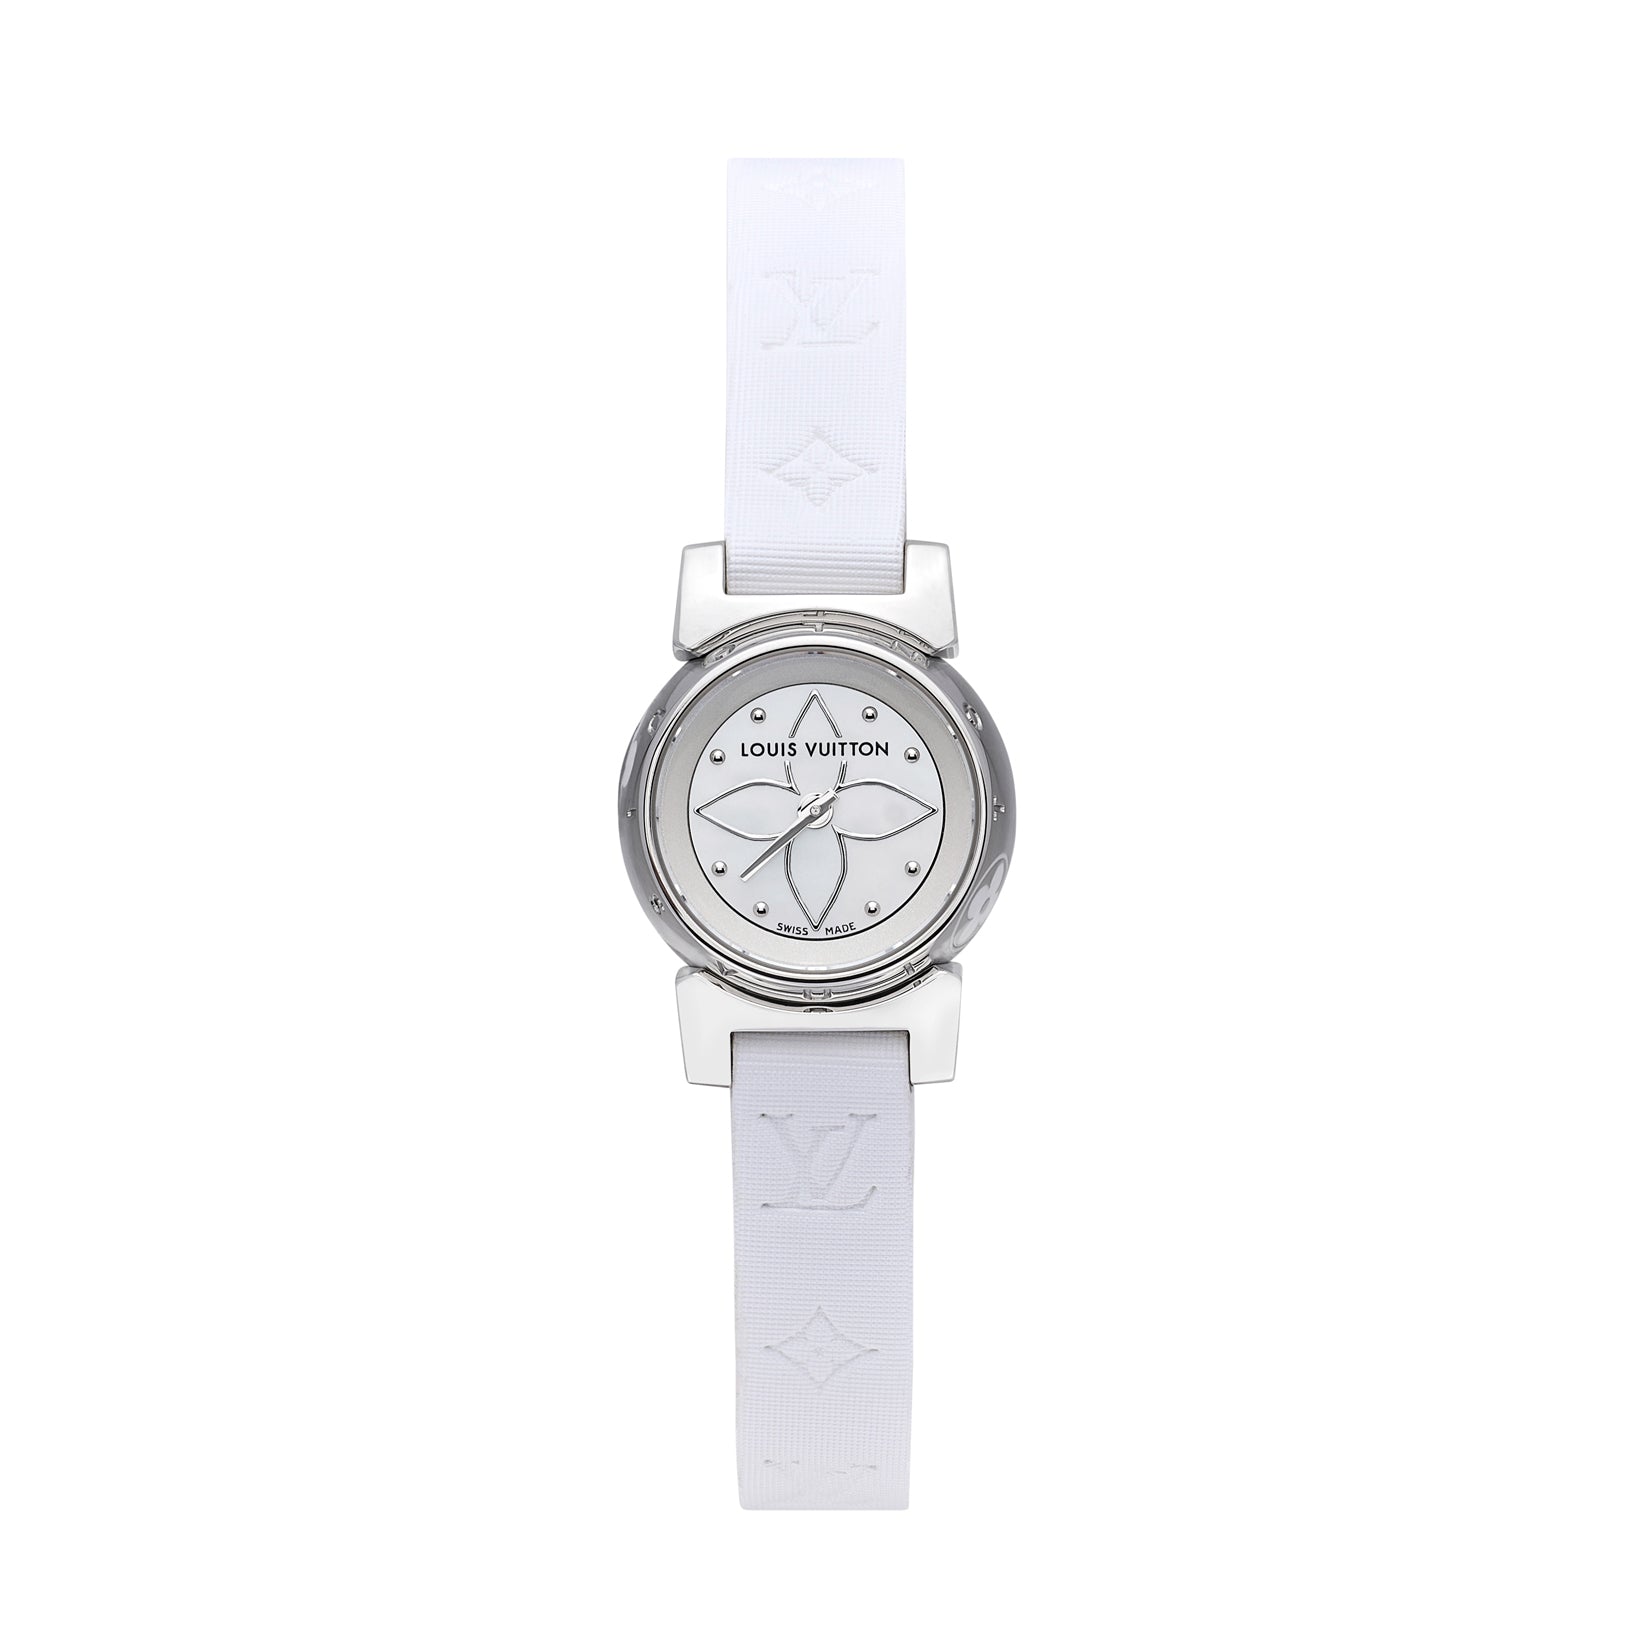 Louis Vuitton Tambour Q11BA, steel, quartz, white rubber strap. for $1,676  for sale from a Trusted Seller on Chrono24